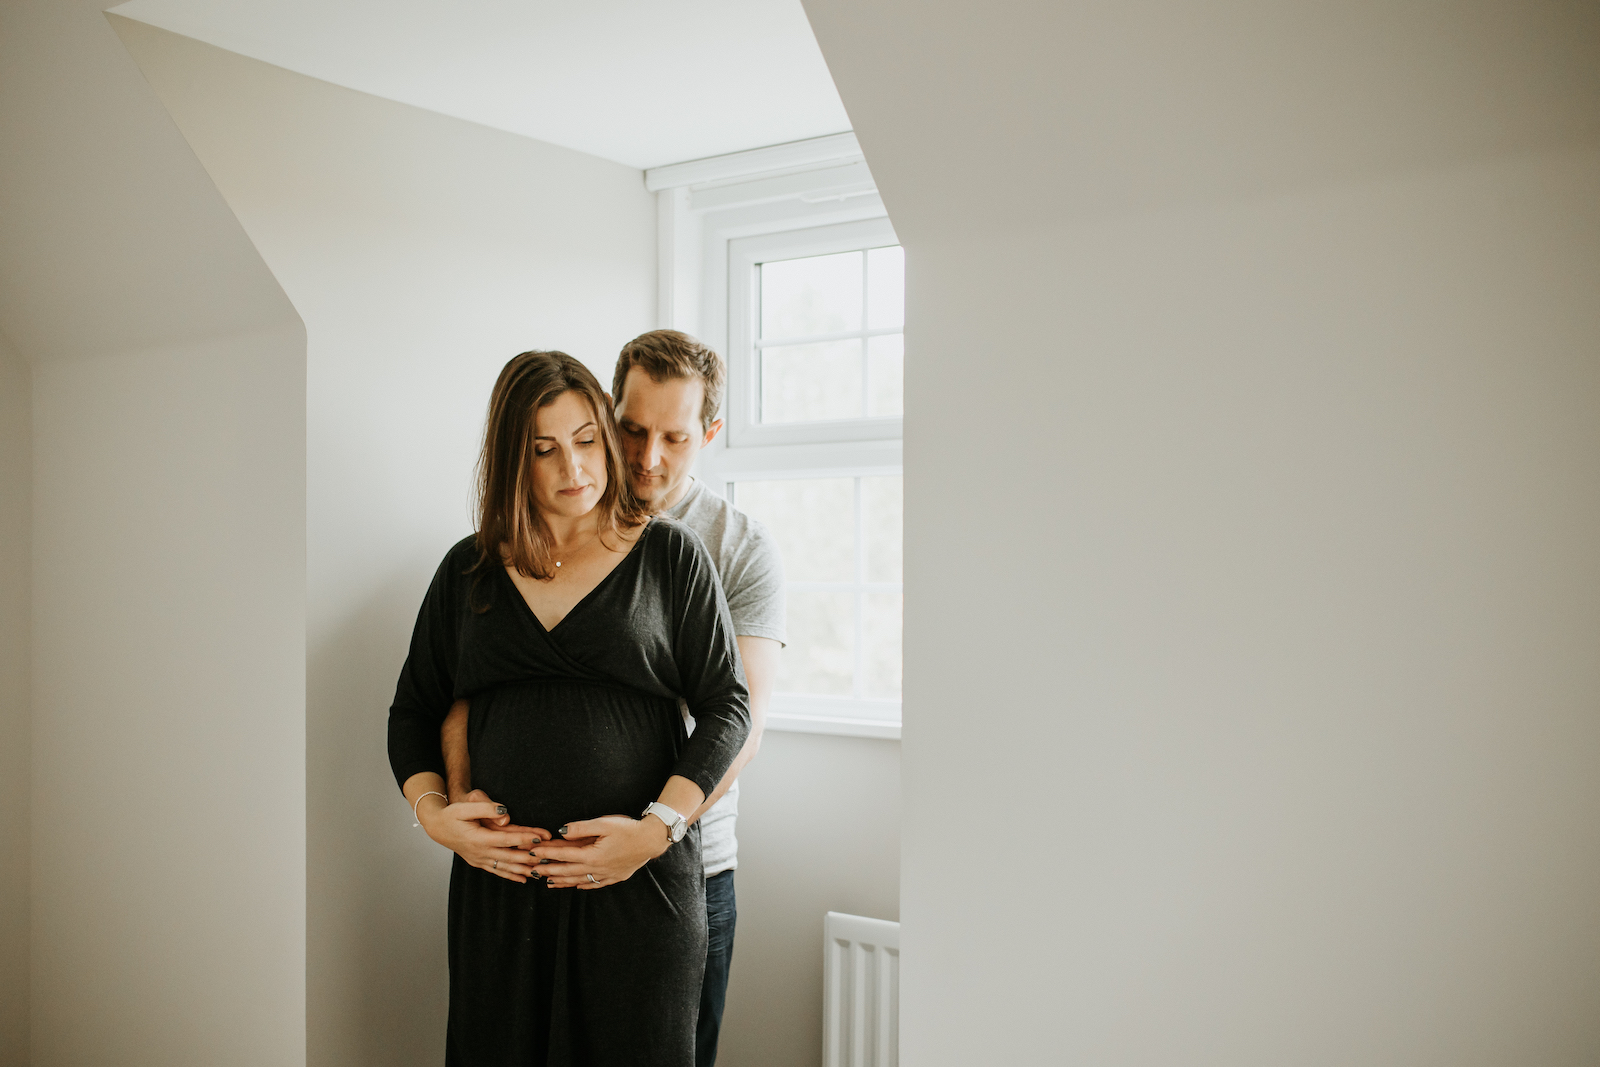 Mum and dad to be standing by bedroom window cradling pregnancy bump - at home maternity photoshoot